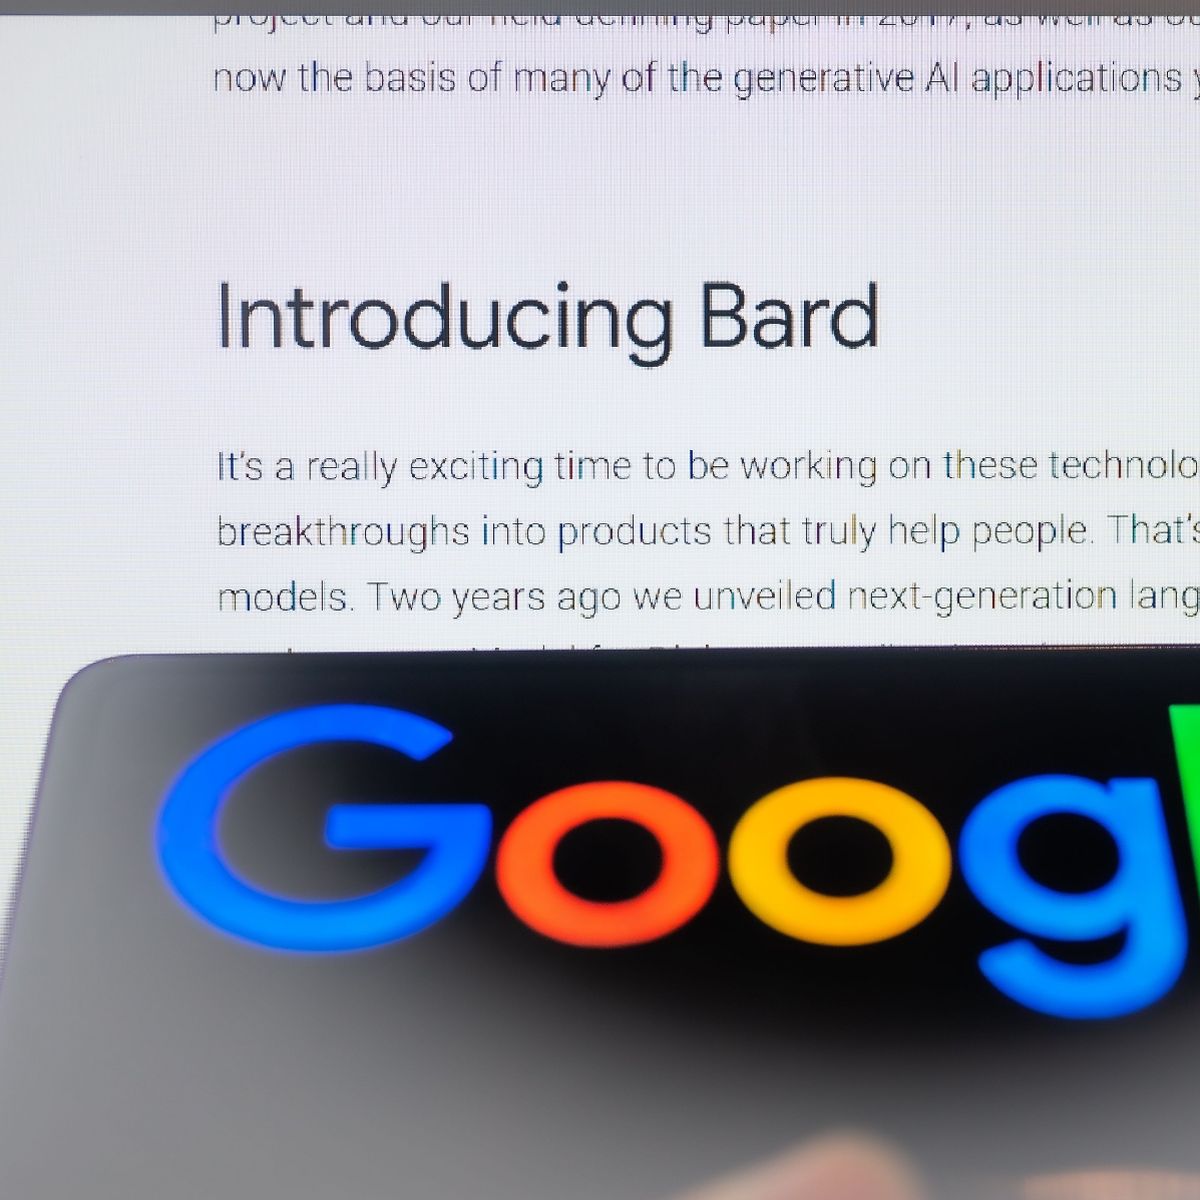 The rush to launch Bard AI caused Google's shares to plummet.